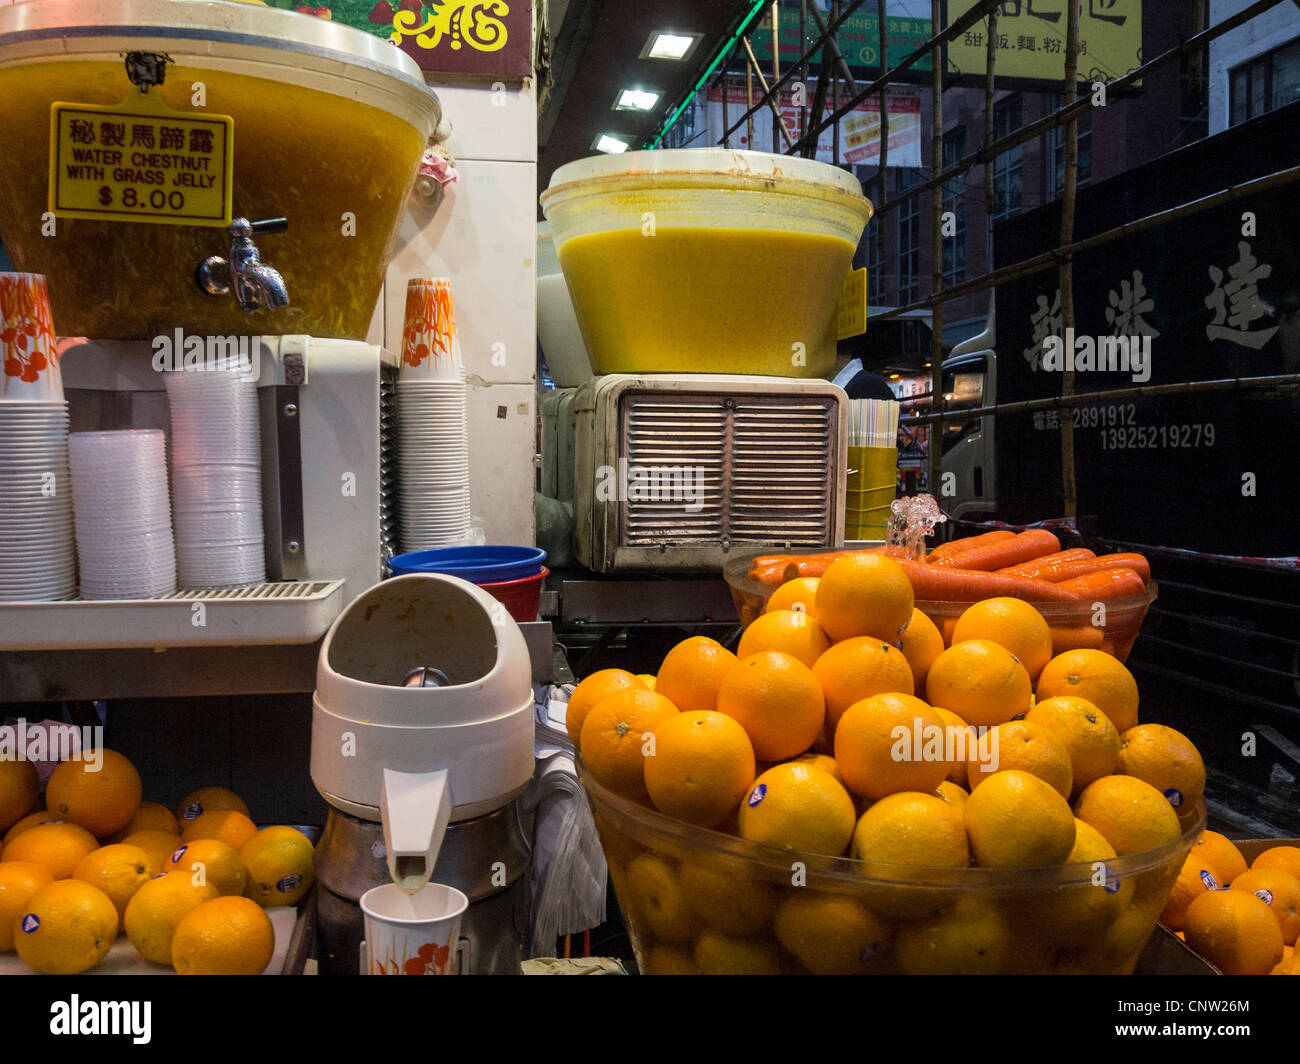 Juice stall on a street corner with oranges and carrots on display and a little fountain playing over the carrots Stock Photo